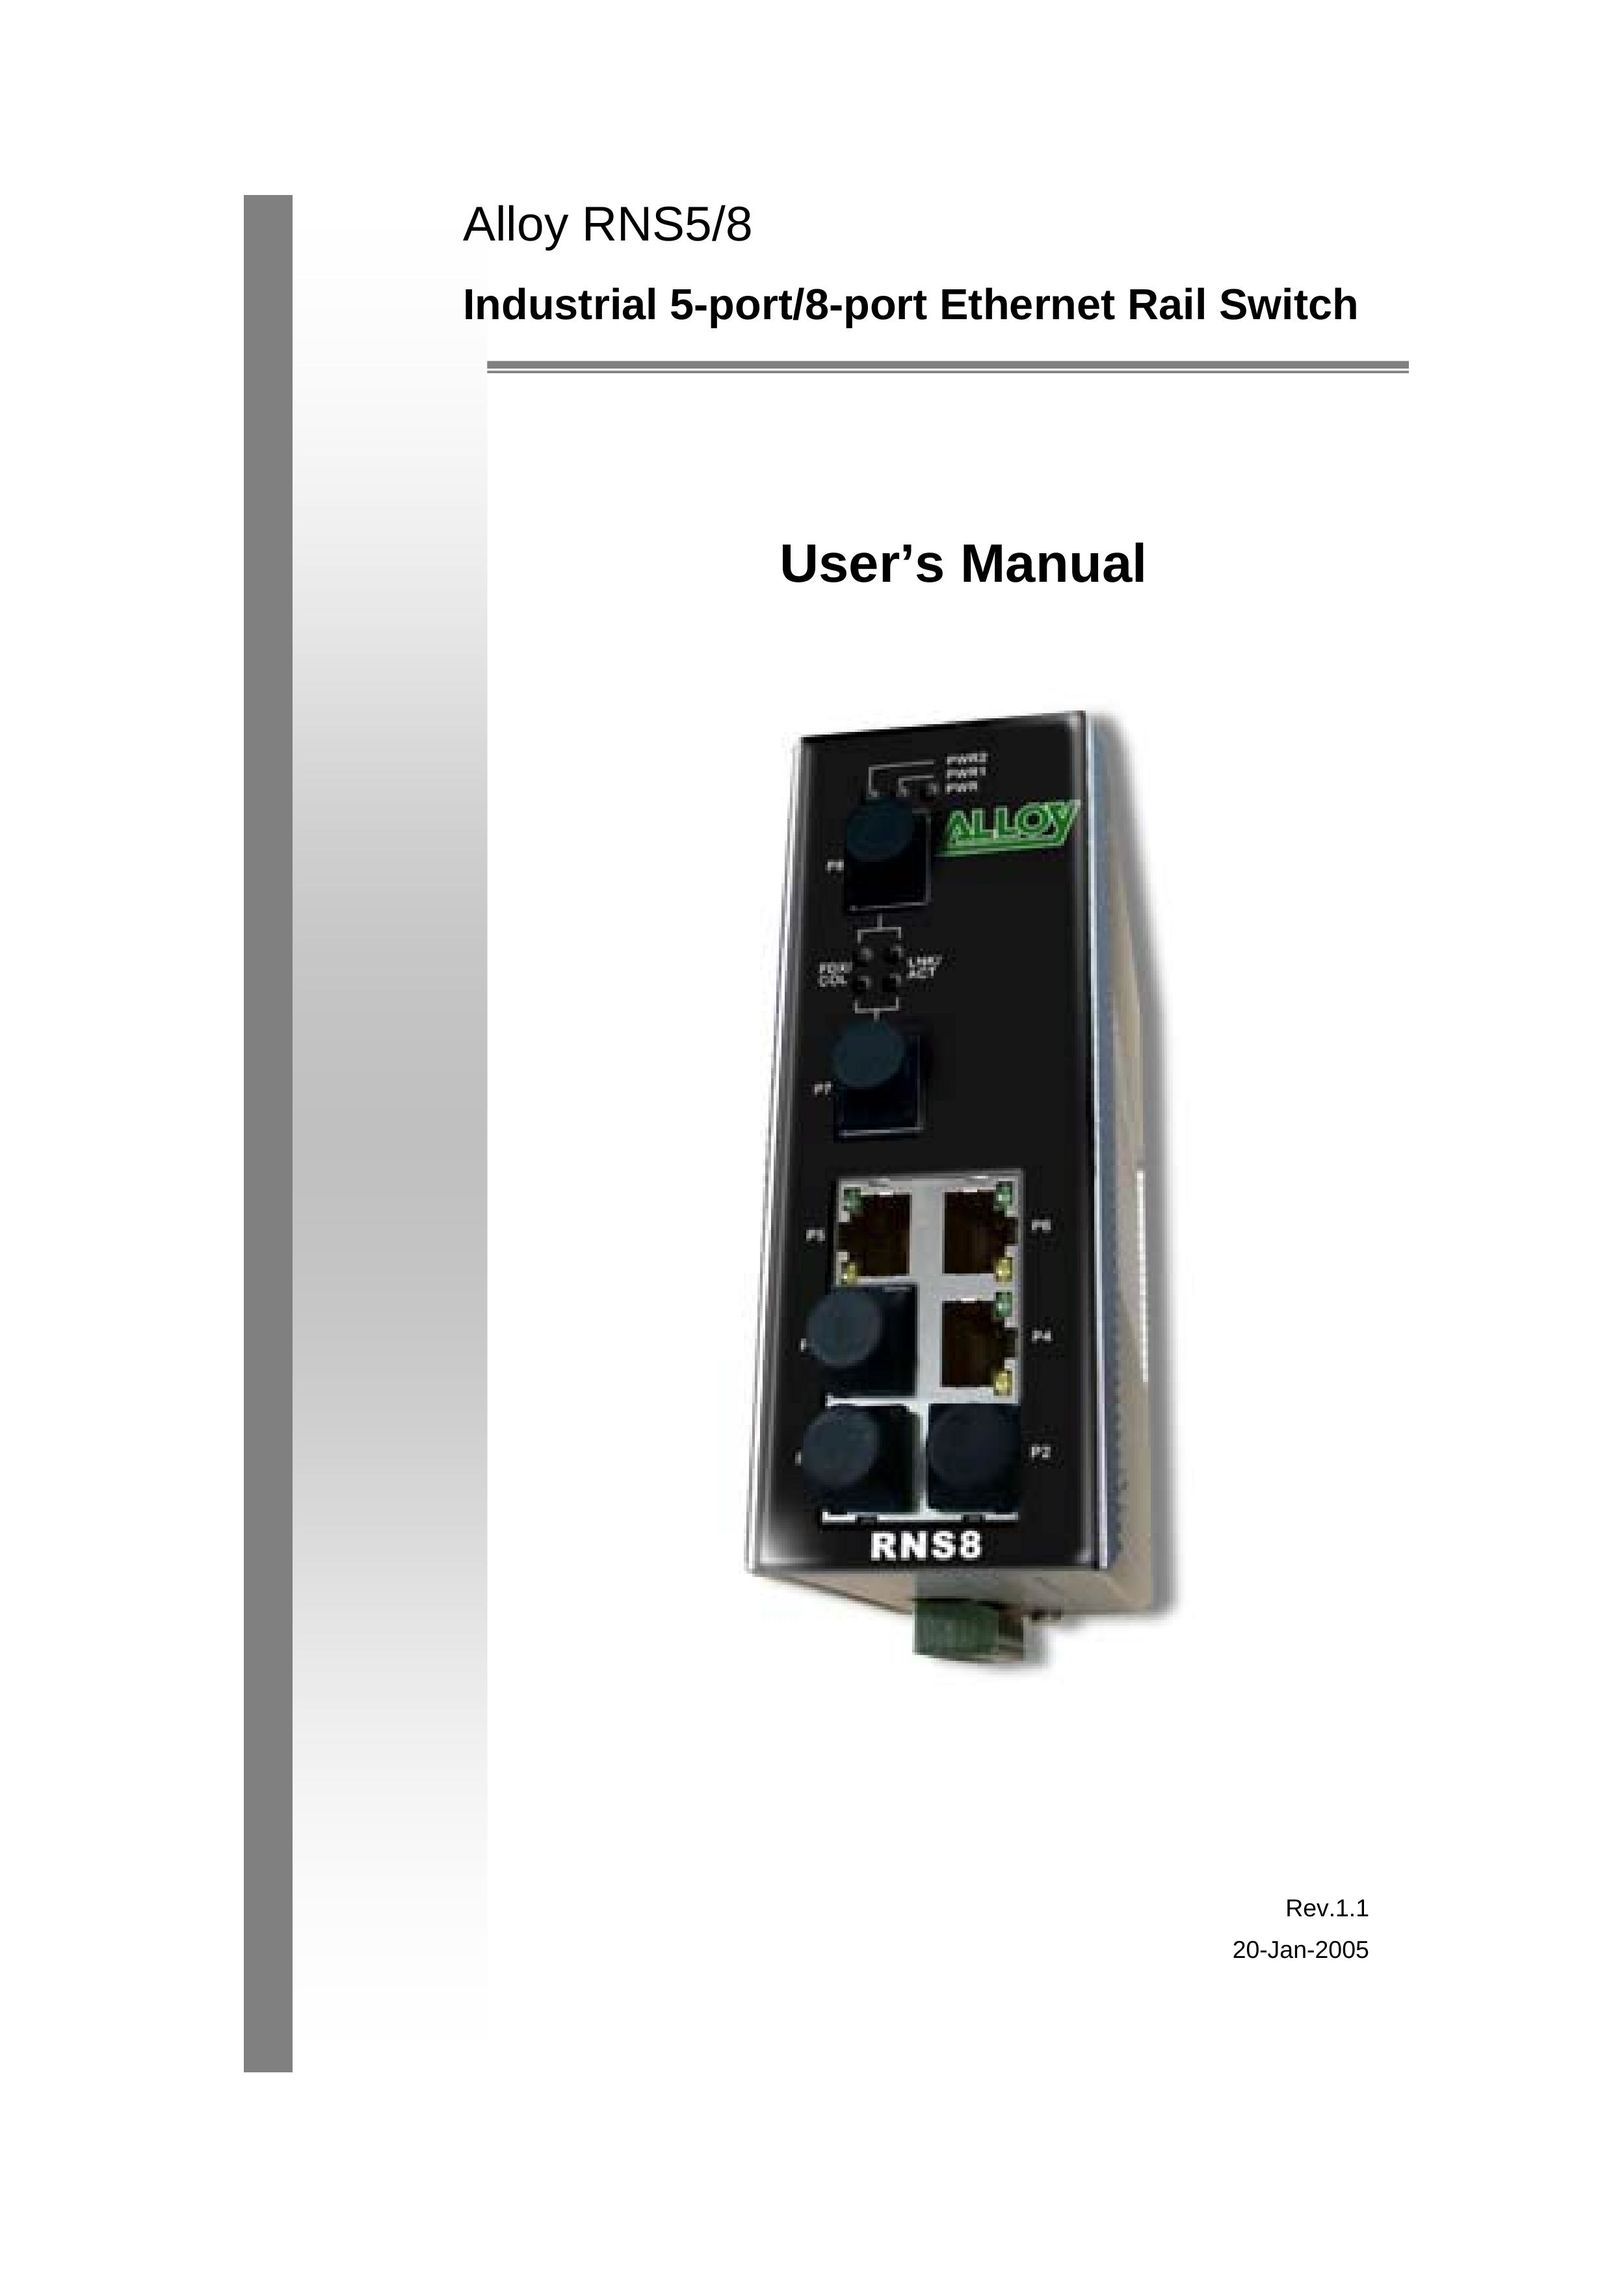 Alloy Computer Products RNS5 Switch User Manual